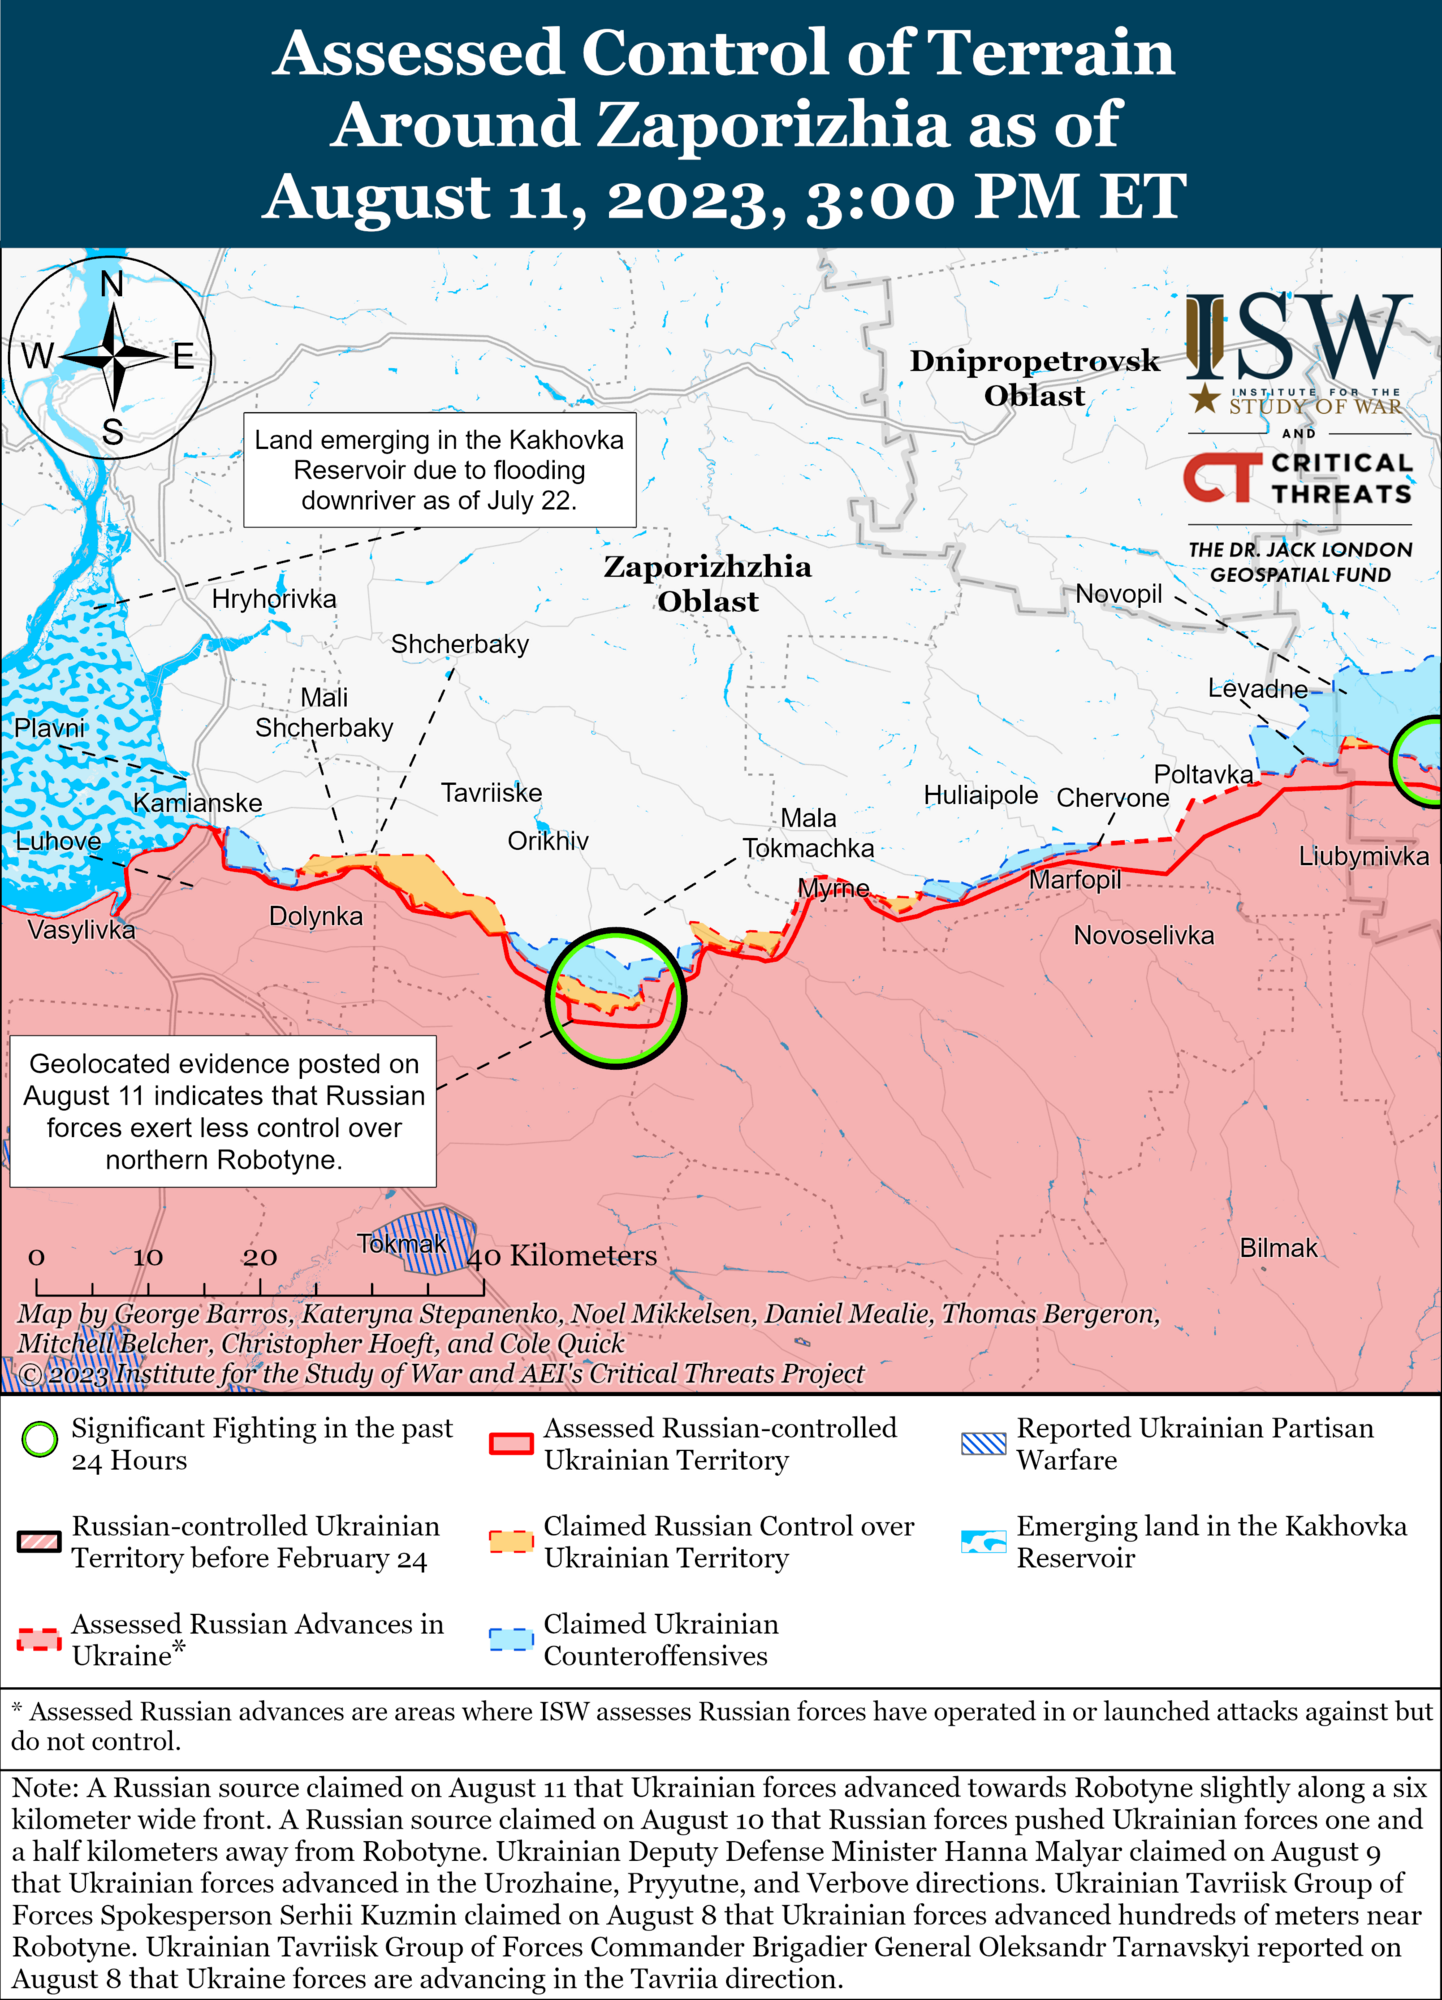 ISW: Ukrainian counteroffensive is successful in western Zaporizhzhia region, forcing occupiers to redeploy